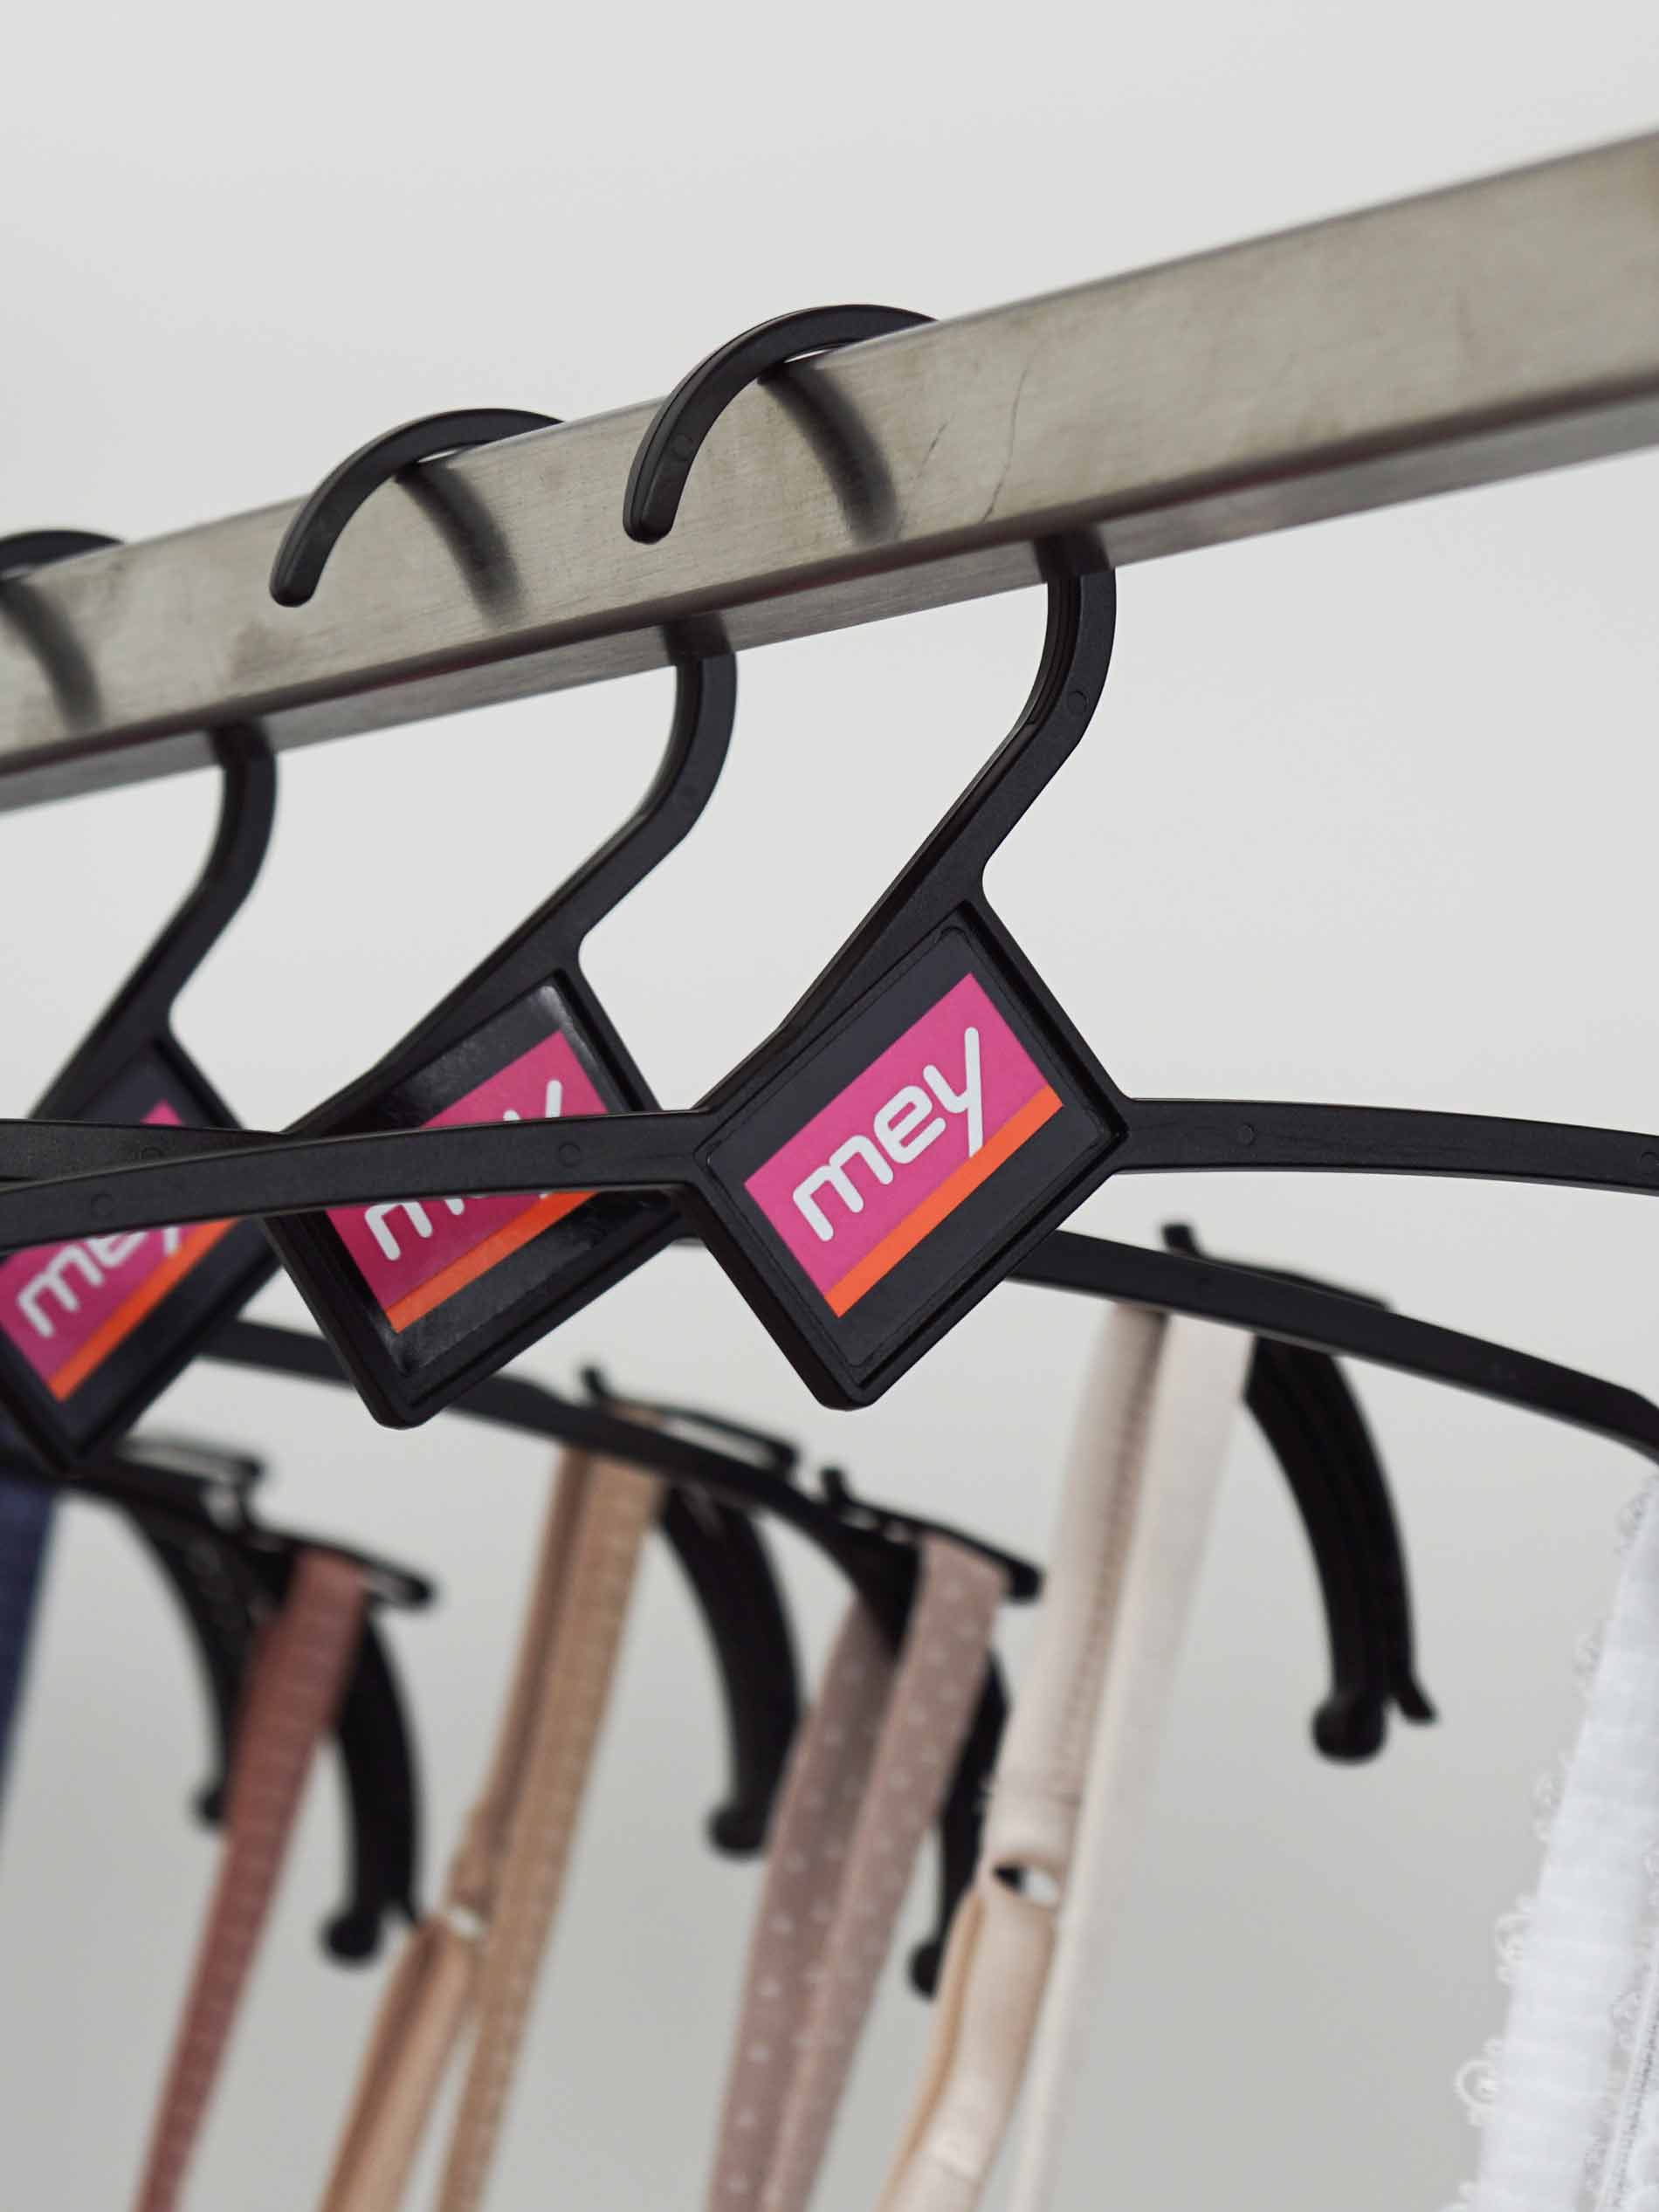 mey’s reusable hangers lined up on a clothing rail with clothing hanging from them | mey®